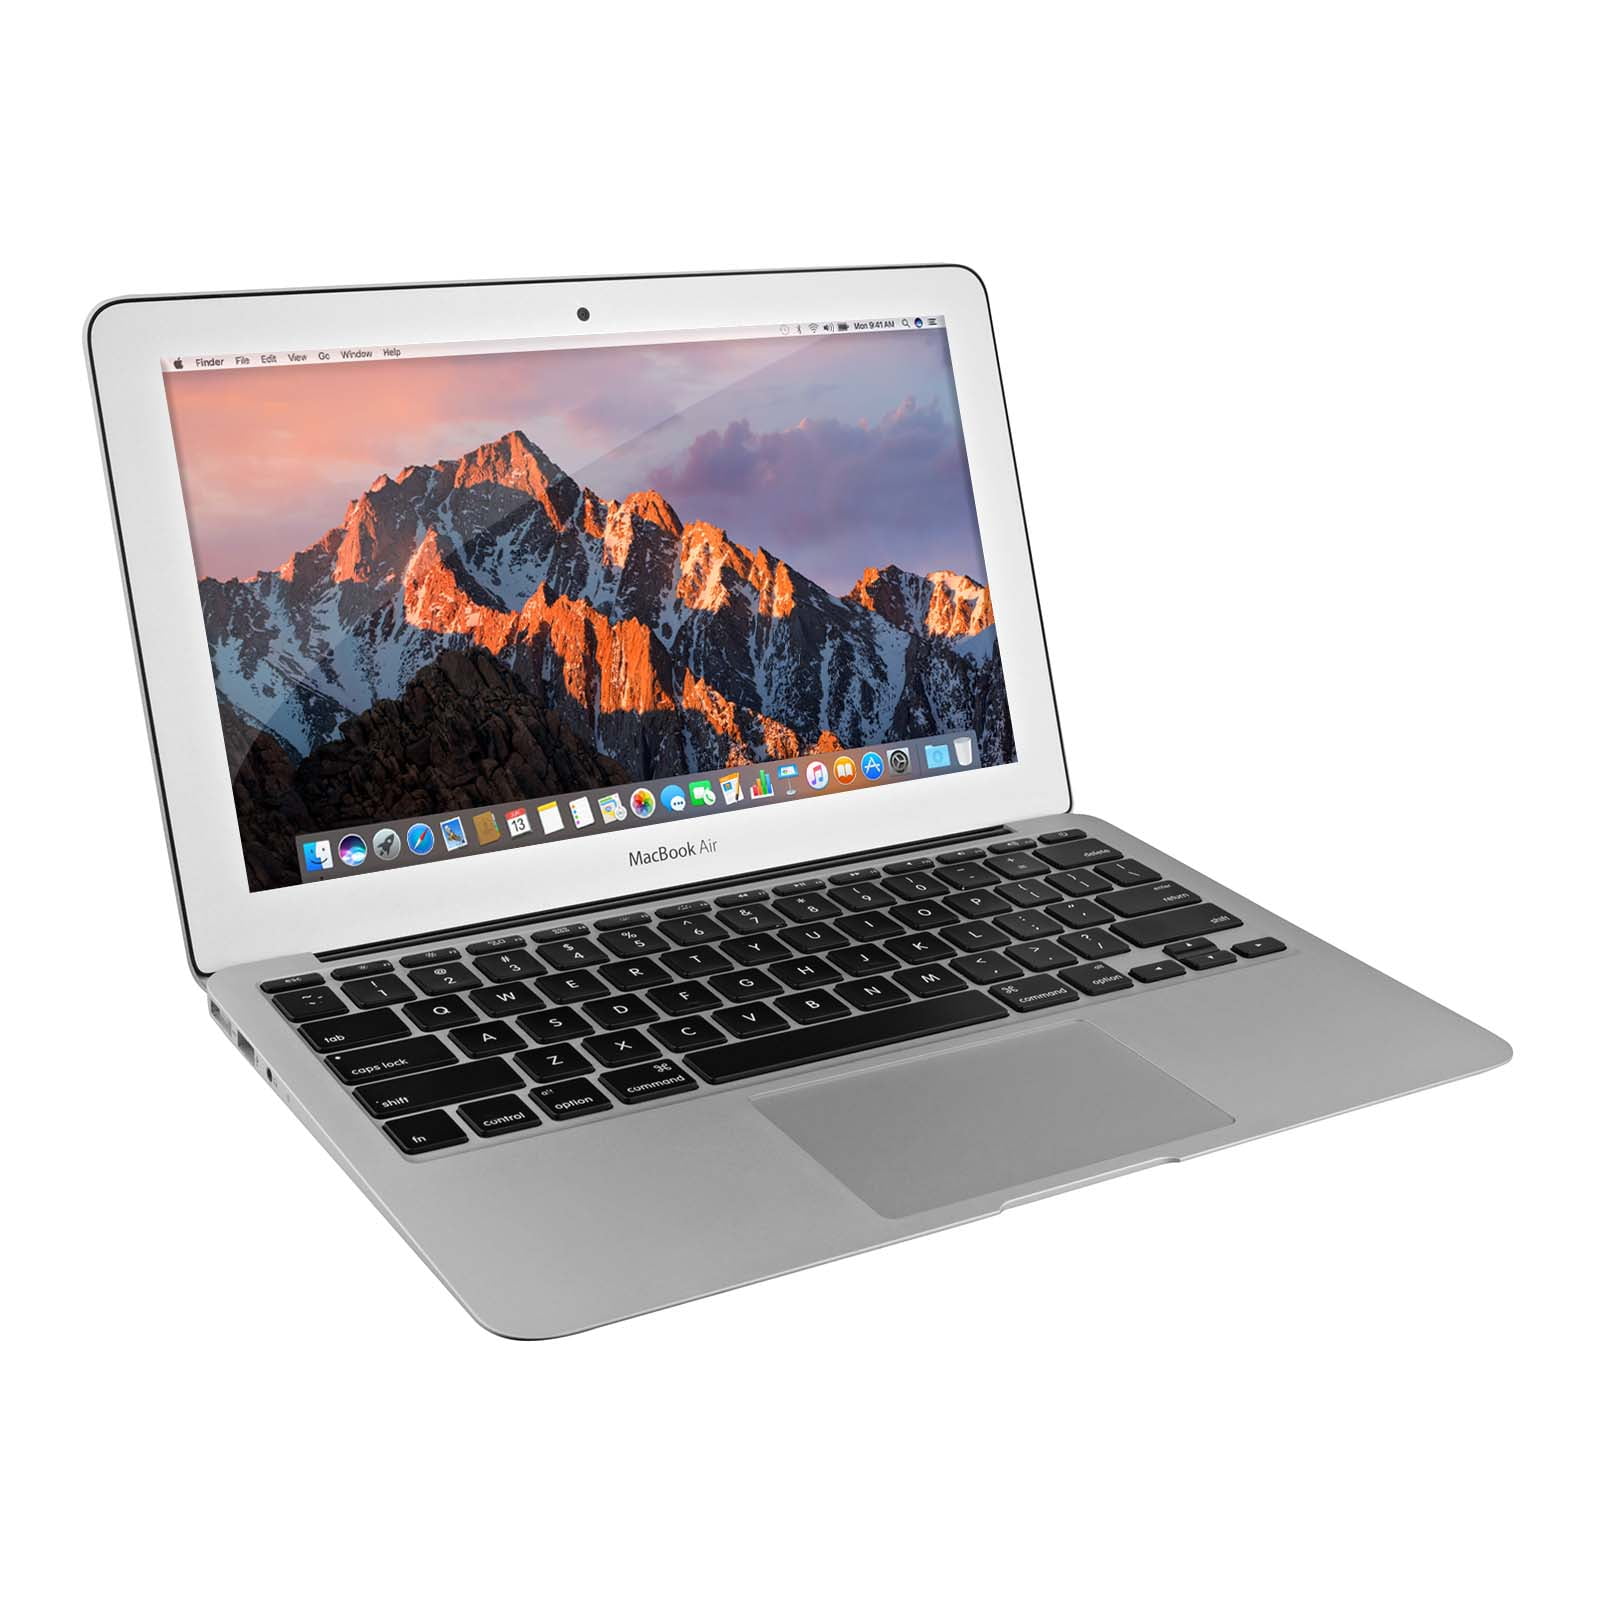 Apple MacBook Air 11.6" Laptop MD223LL/A (Silver) (Certified